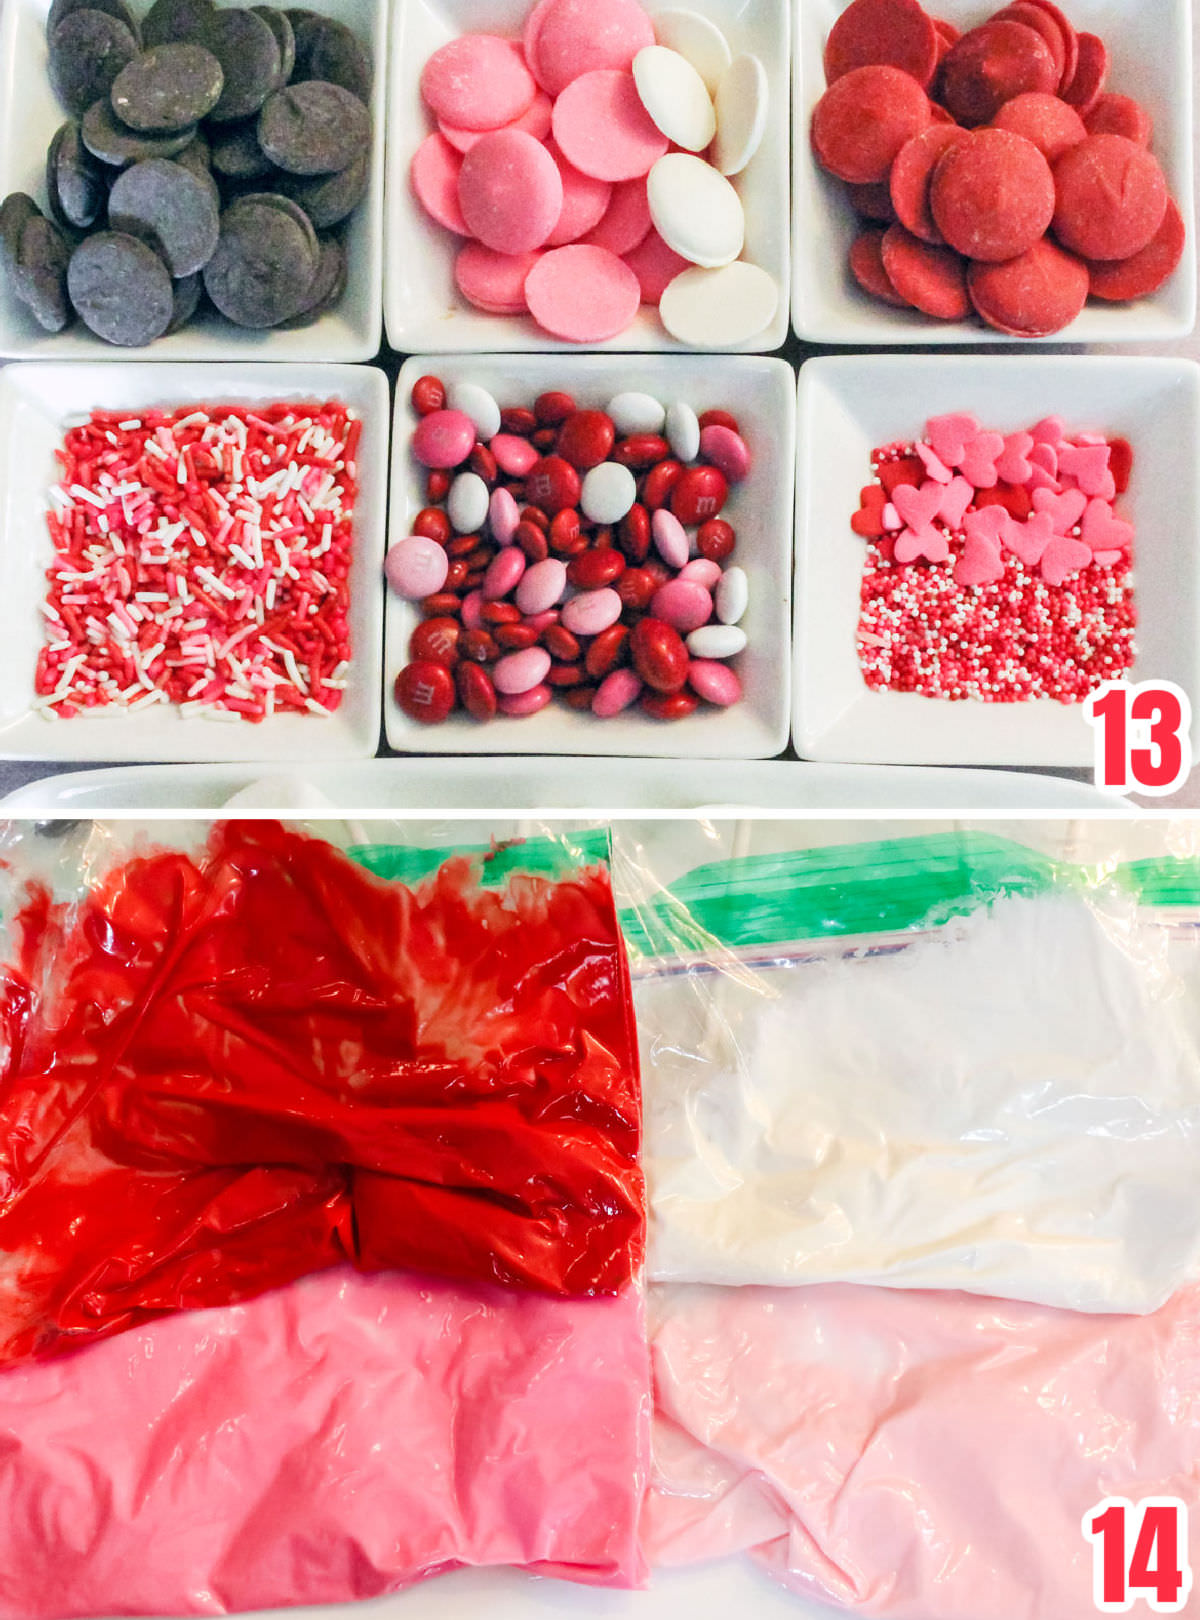 Collage image showing the ingredients you will need to decorate the marshmallow wands including sprinkles, M&M's and candy melts.